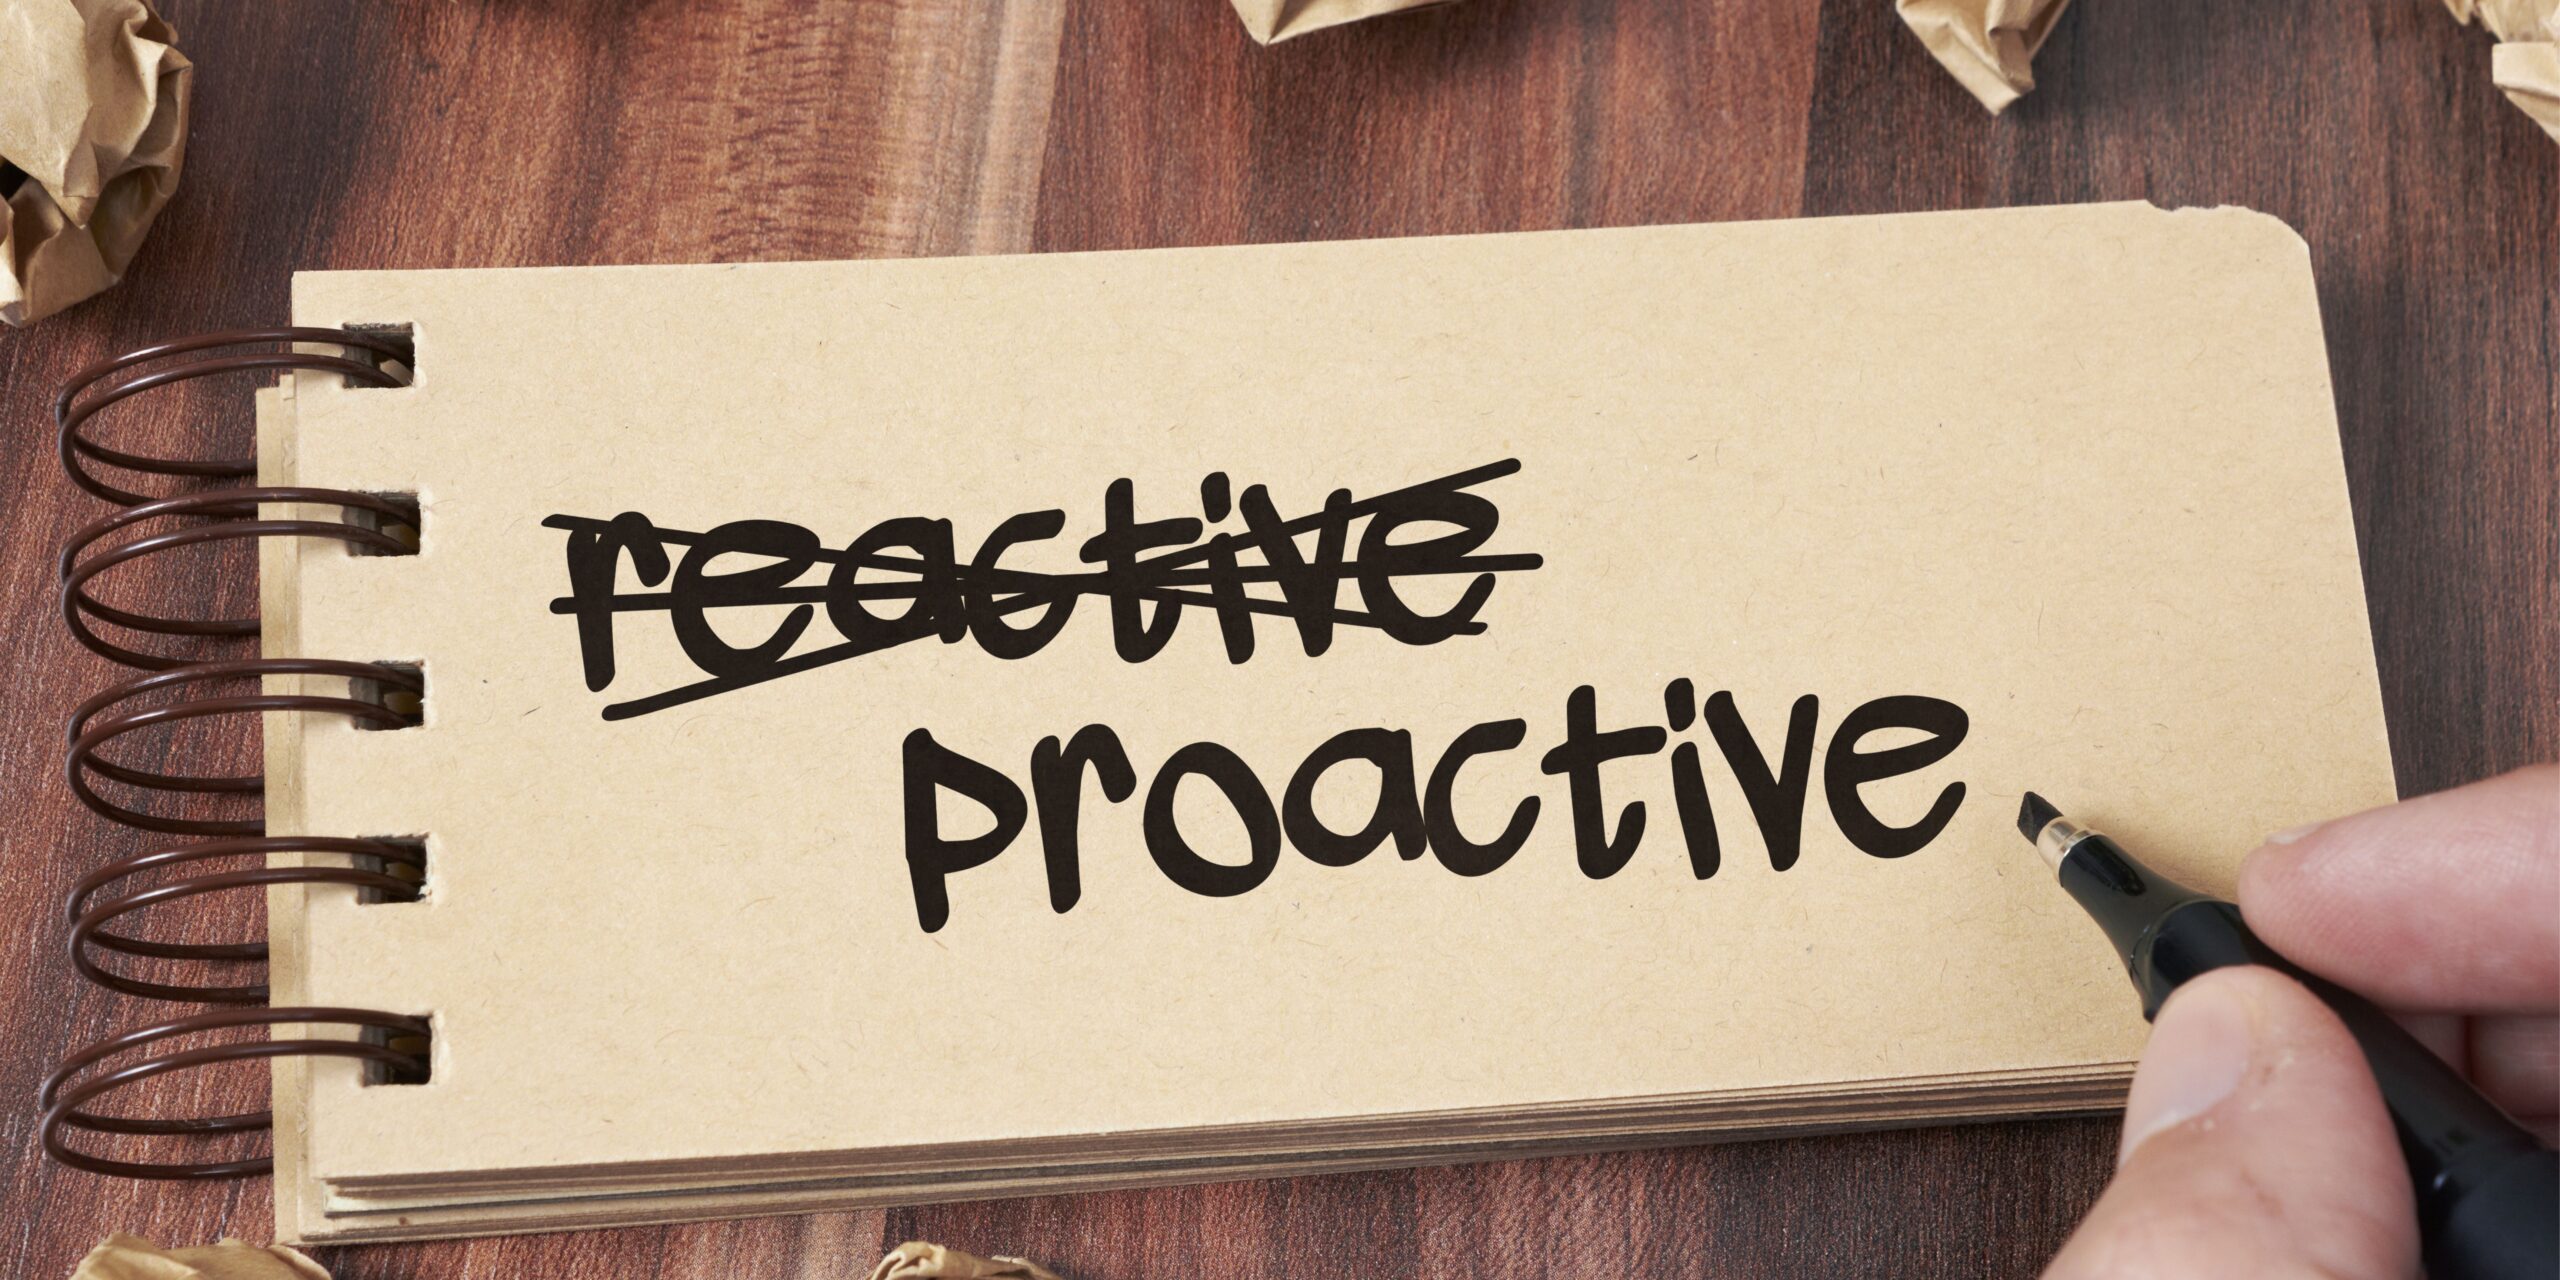 reactive vs. proactive hiring - why your firm needs to be proactive